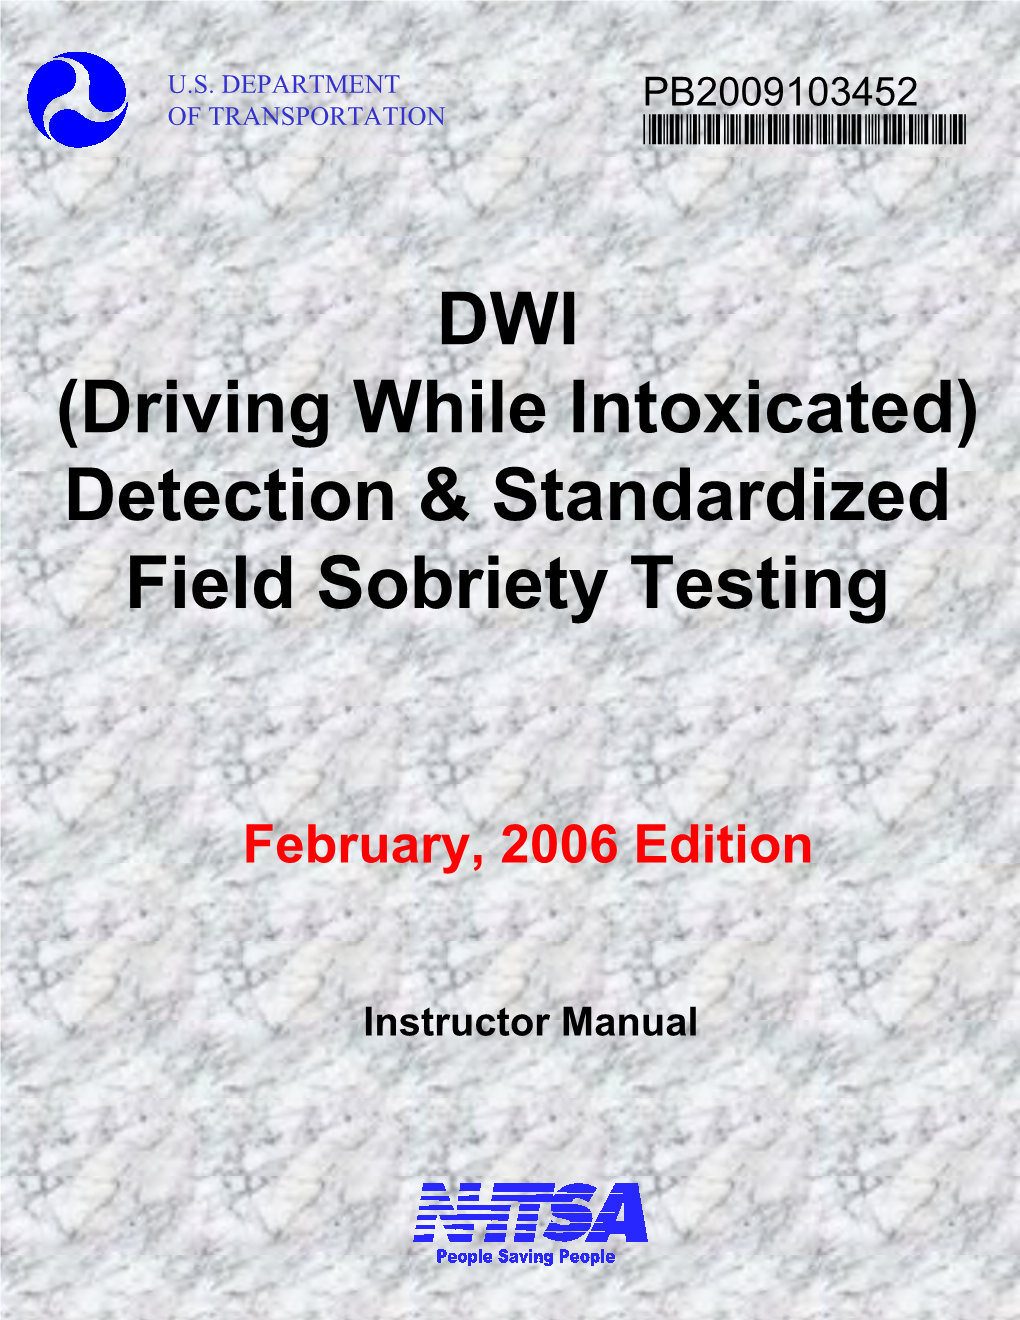 Dwi Detection and Standardized Field Sobriety Testing